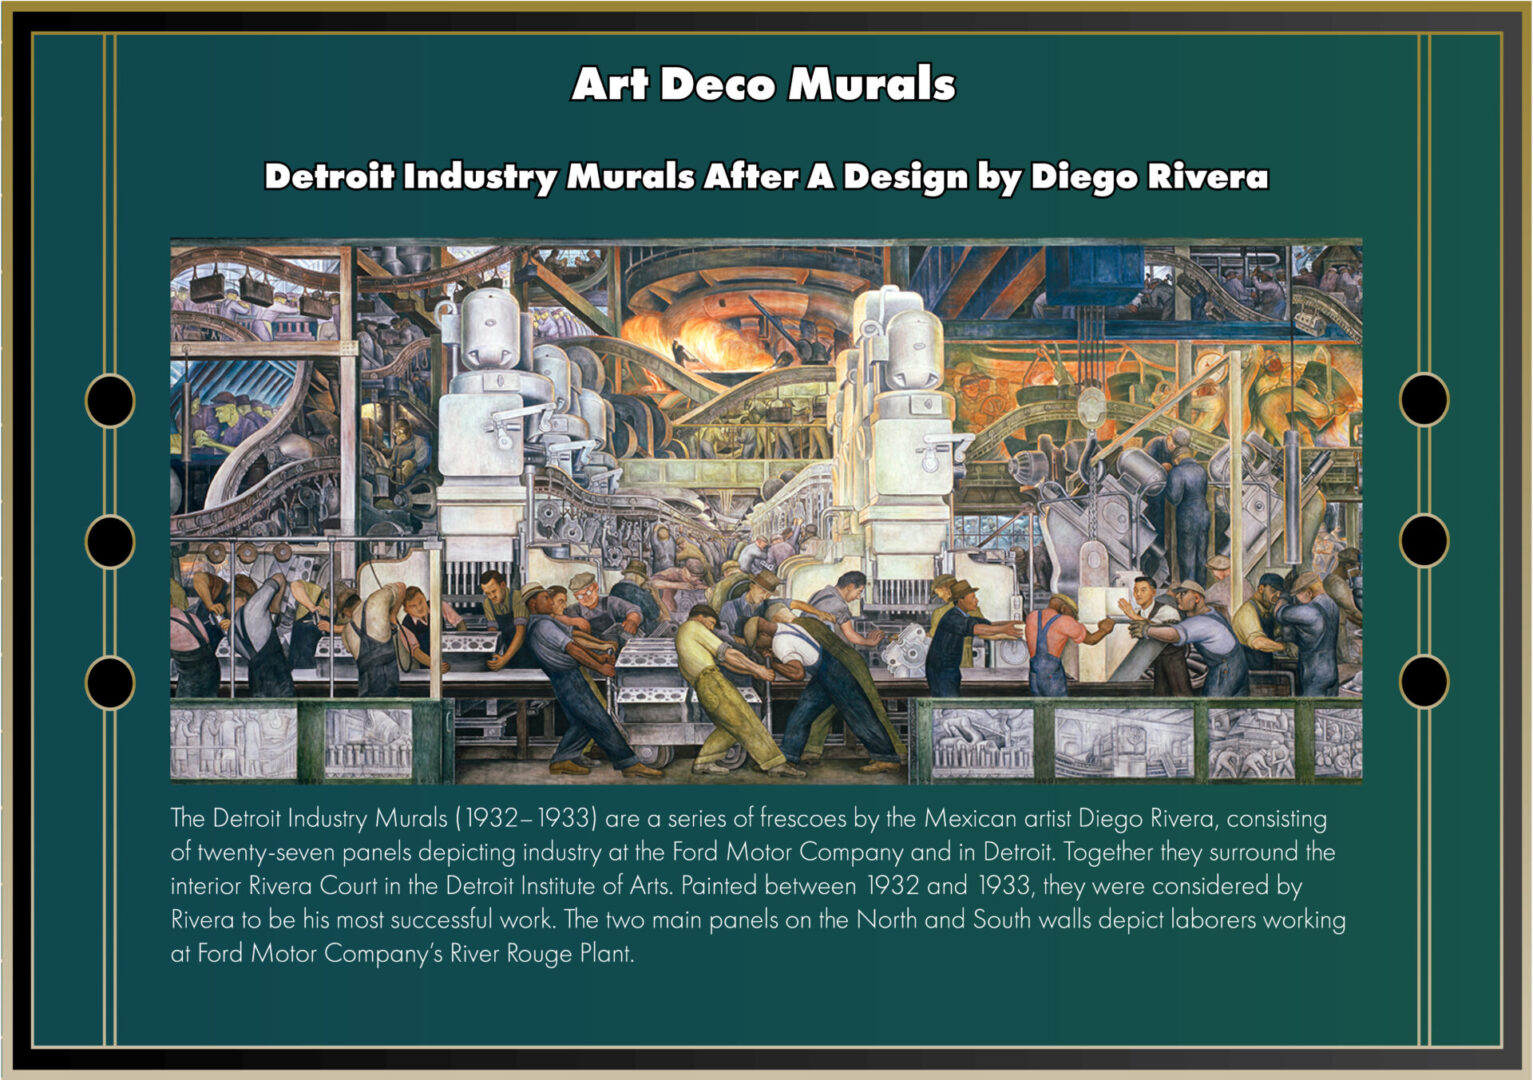 Detroit Industry Mural Design by Diego Rivera